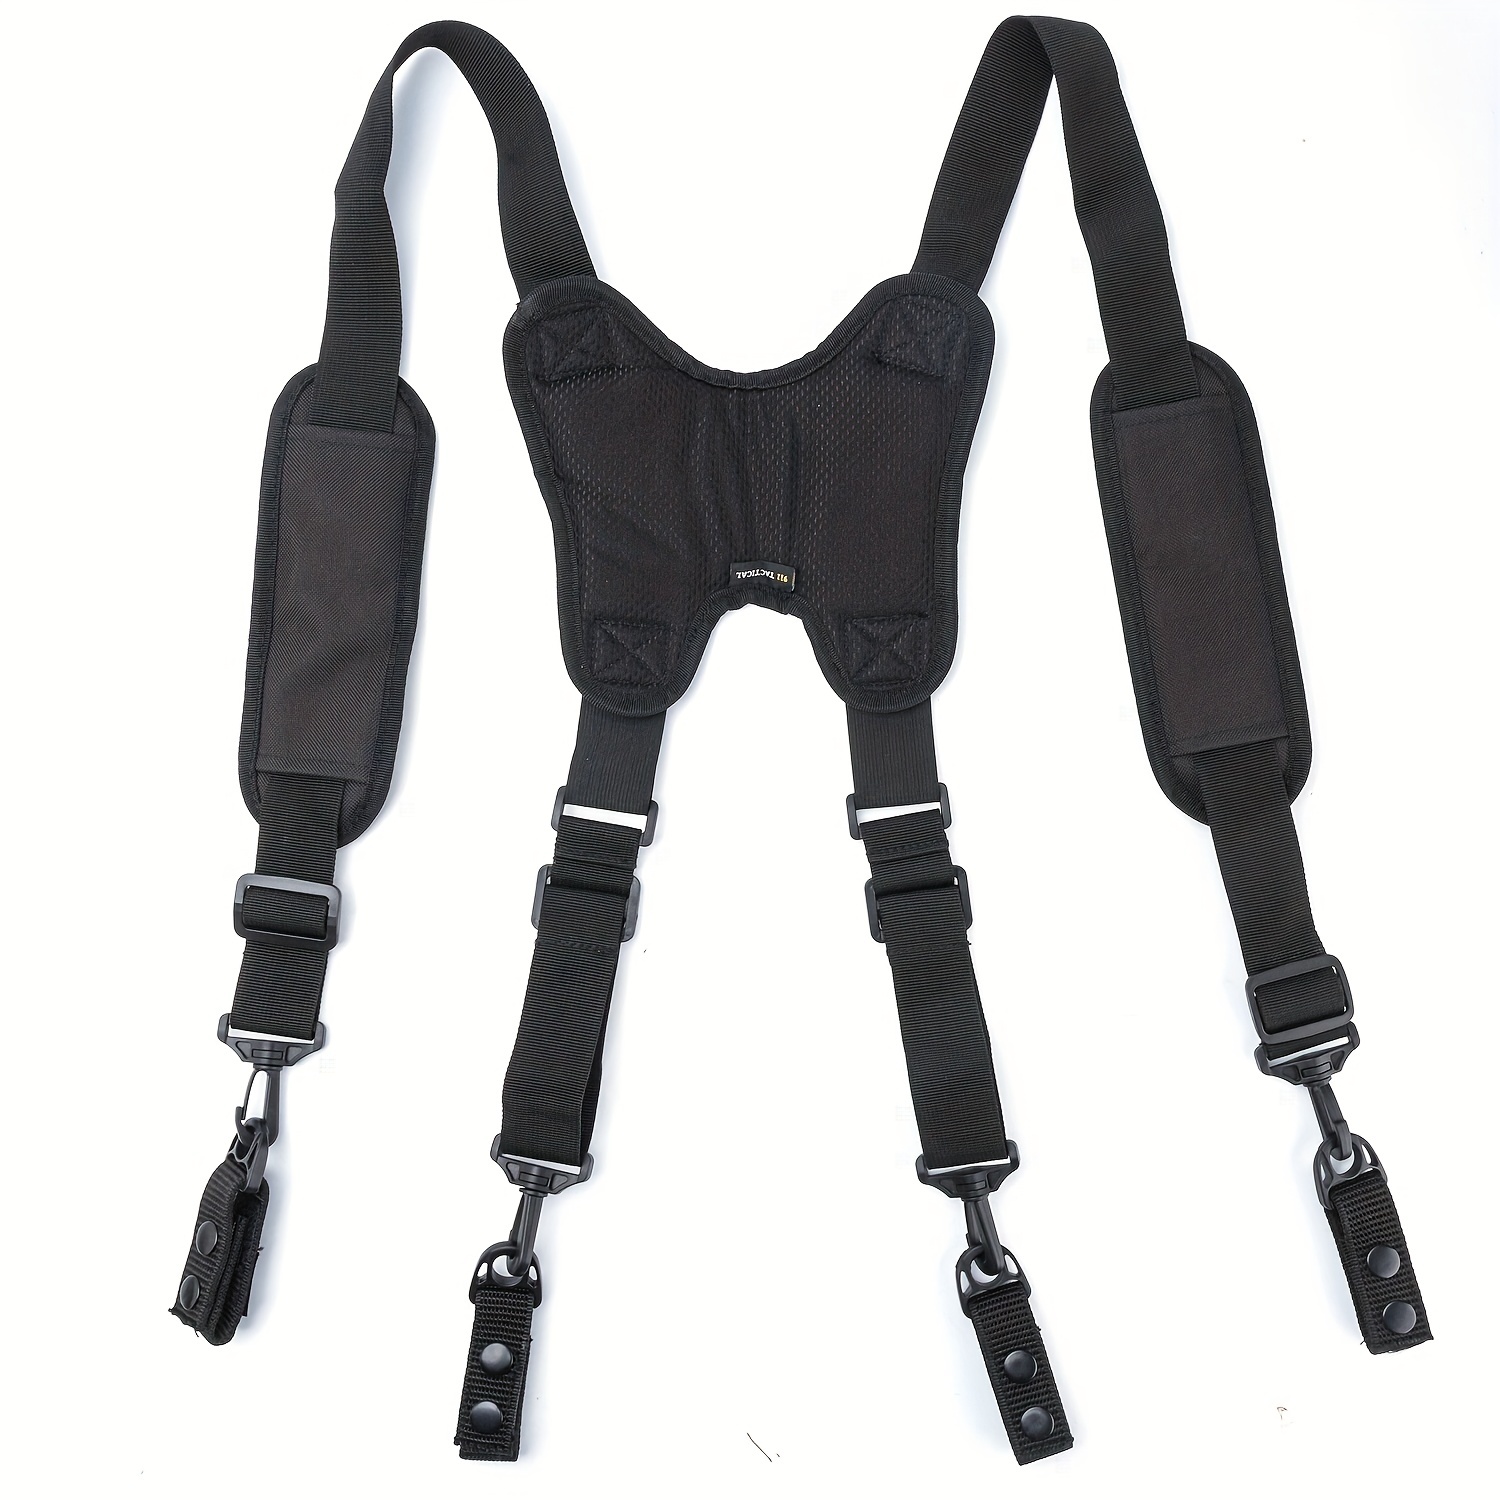 Tactical Harness Suspenders - Lowest Price at Our Store